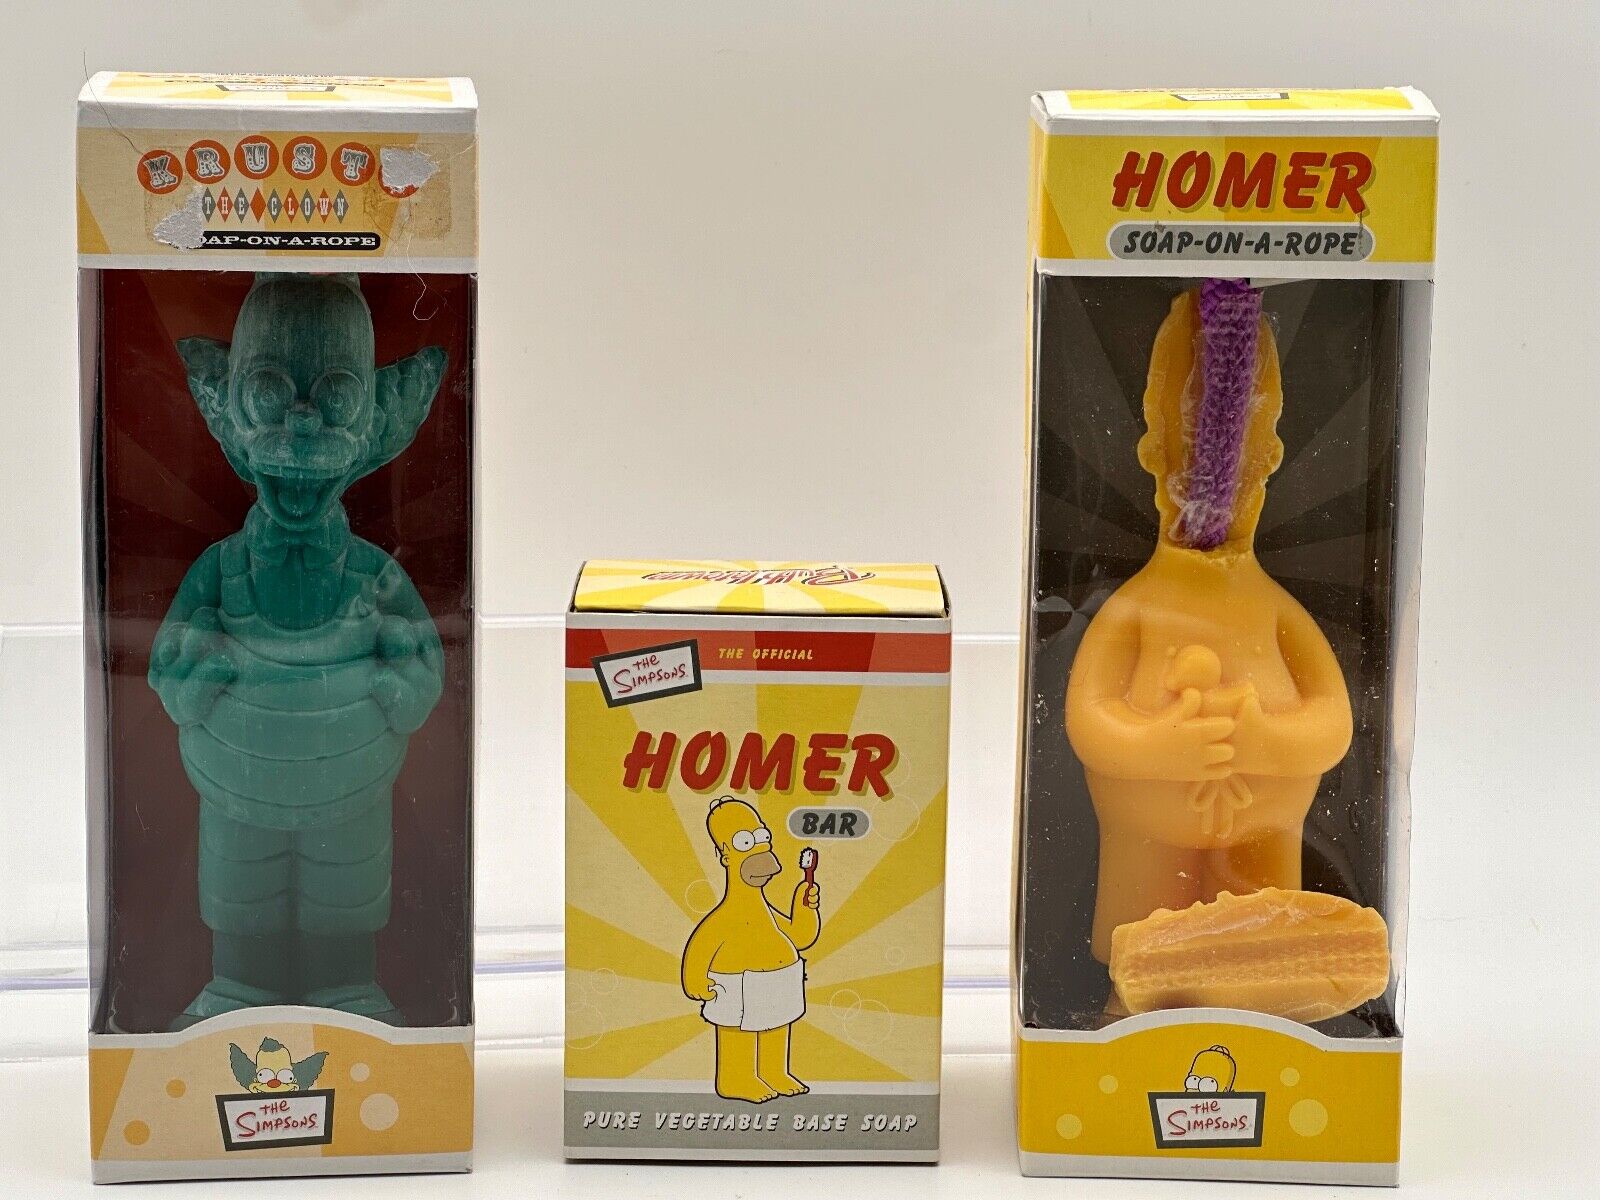 Vintage The Simpsons Novelty Soap Lot of 3 - Homer &Krusty on a Rope + Homer Bar